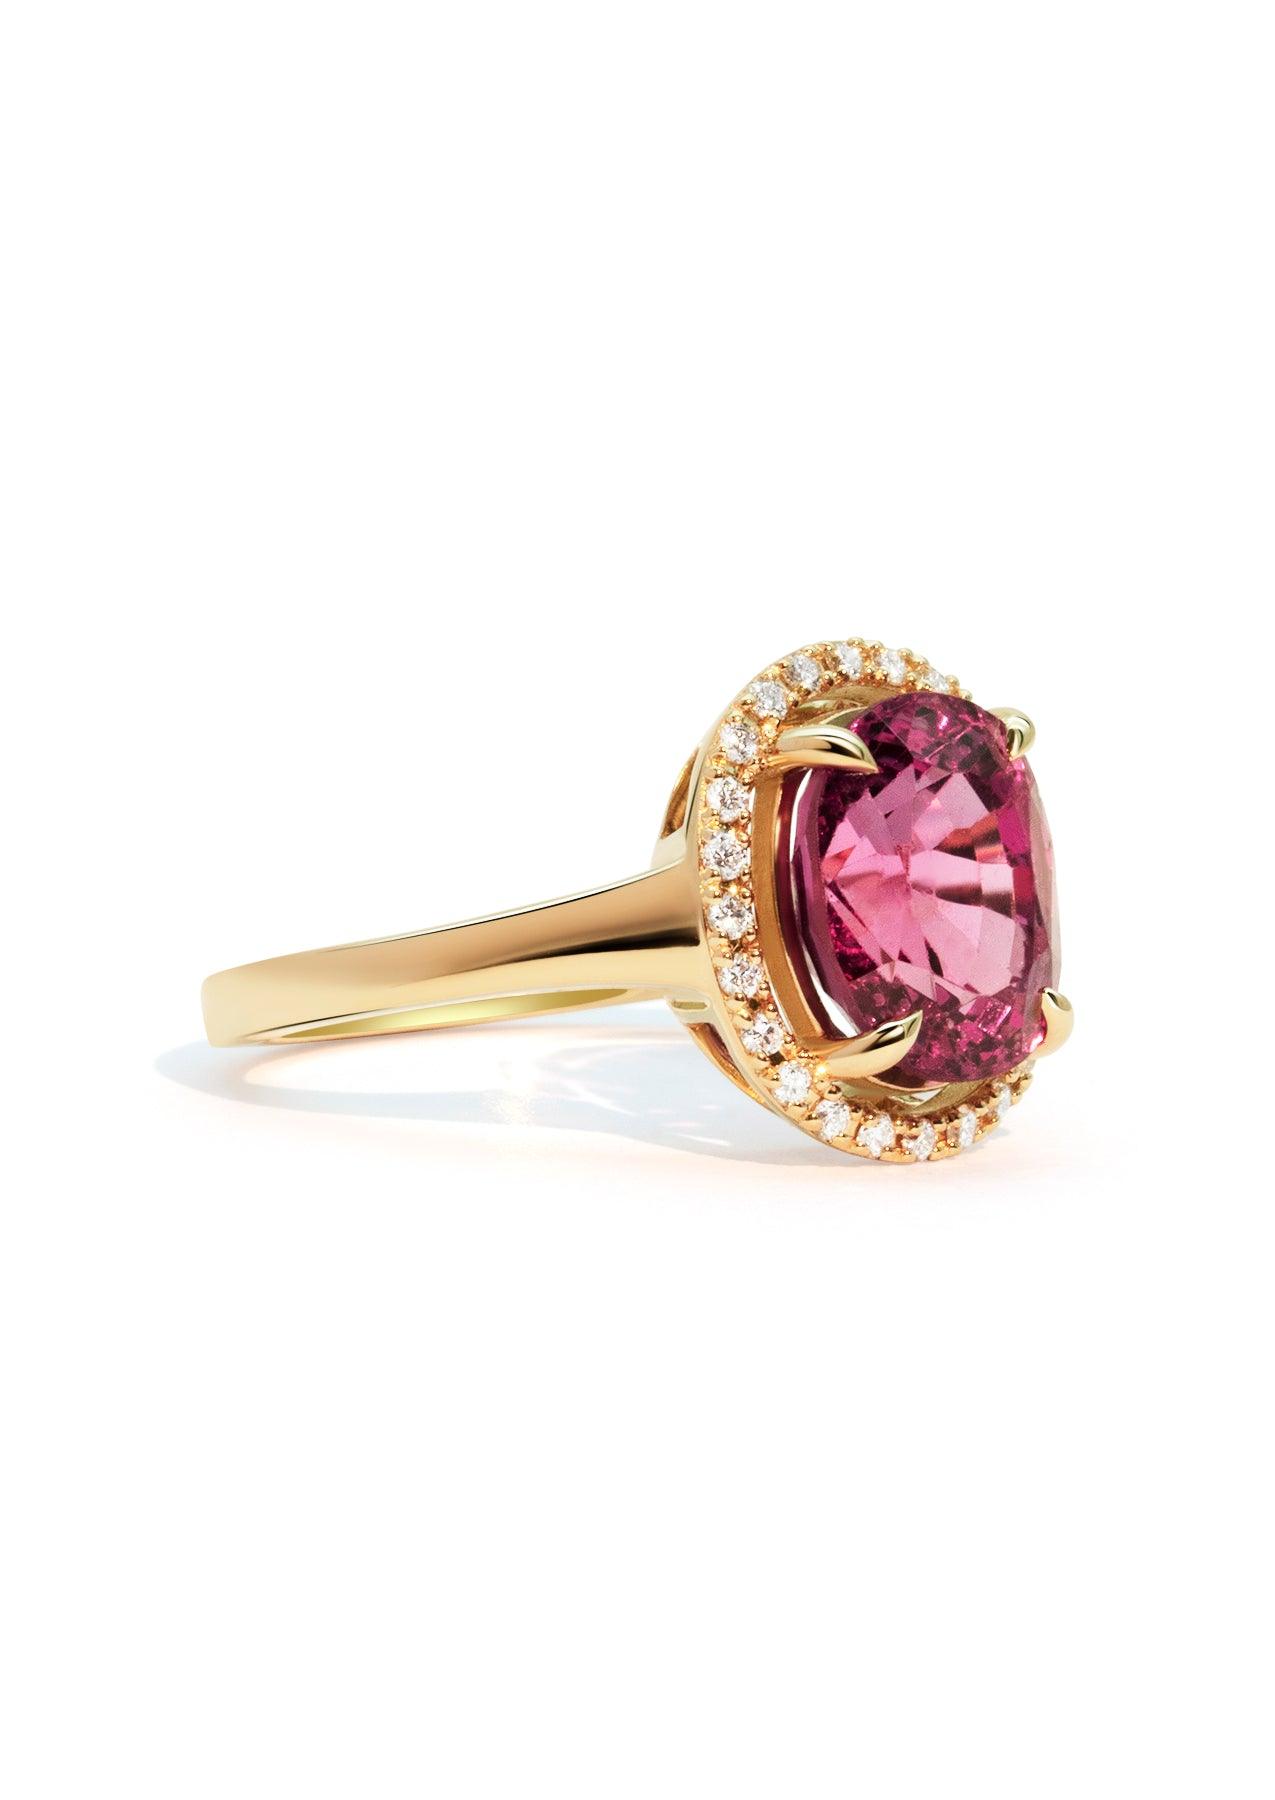 The Iris Ring with 4.4ct Oval Spinel - Molten Store